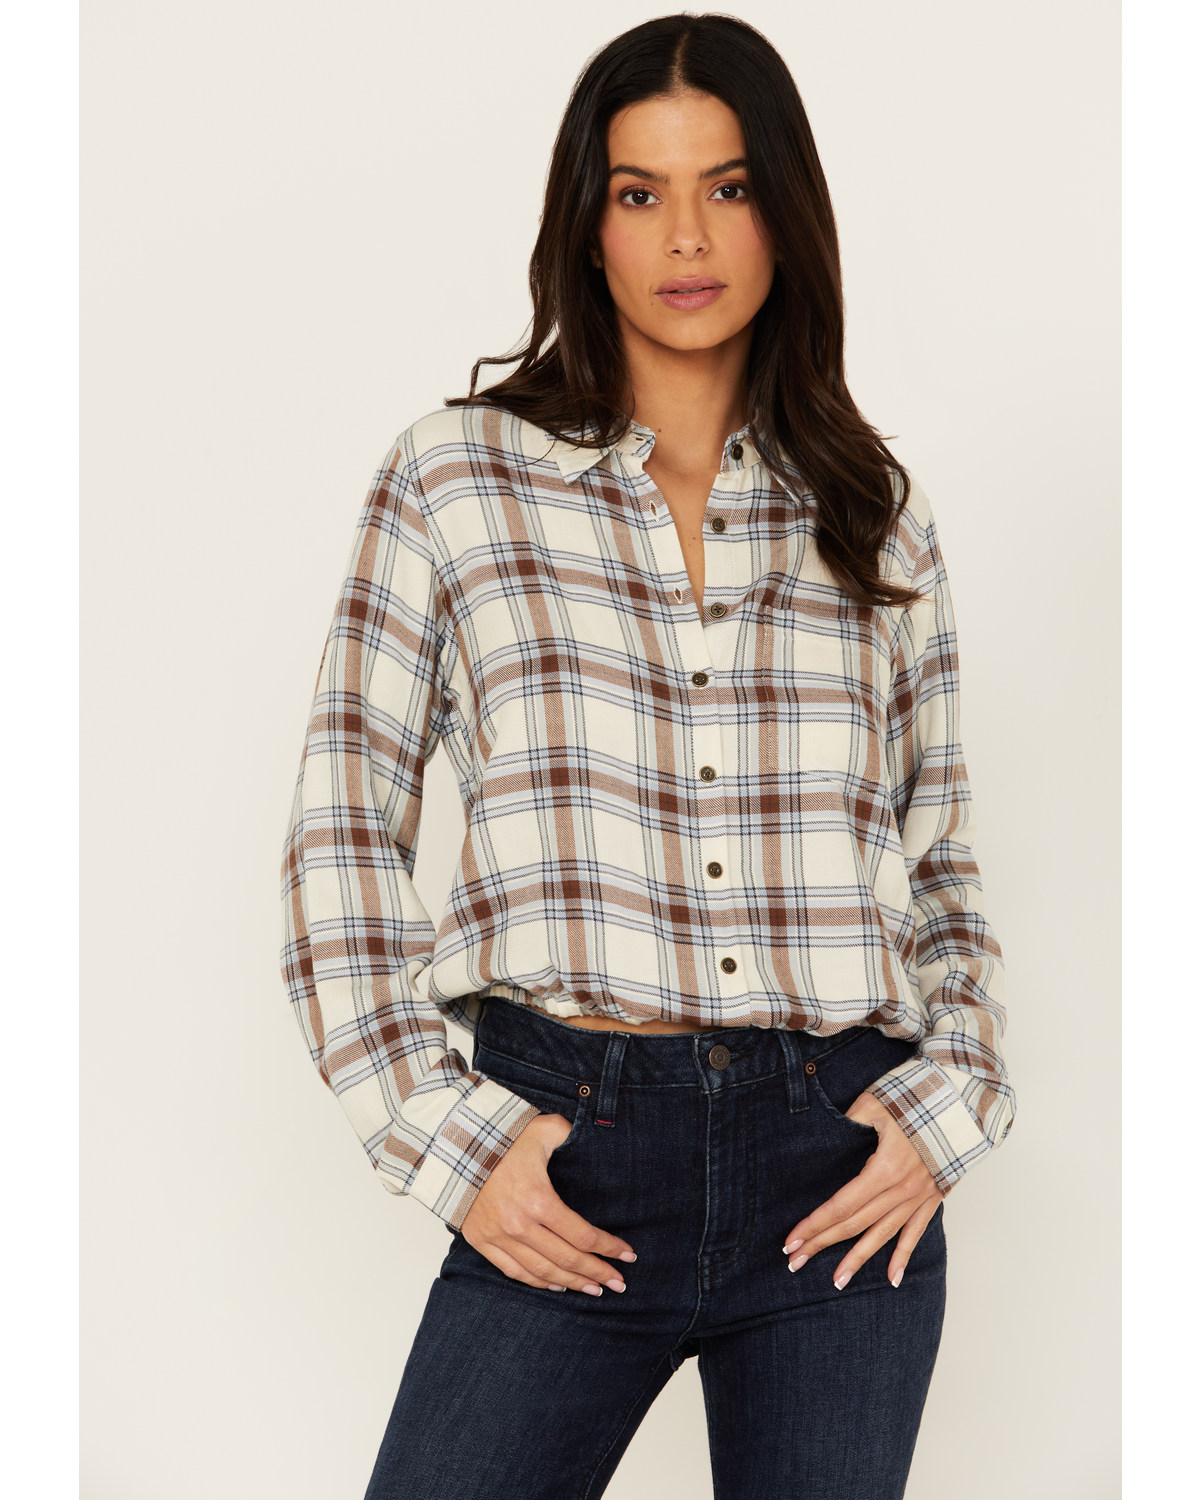 Cleo + Wolf Women's Amy Plaid Print Button-Up Cropped Long Sleeve Flannel Shirt